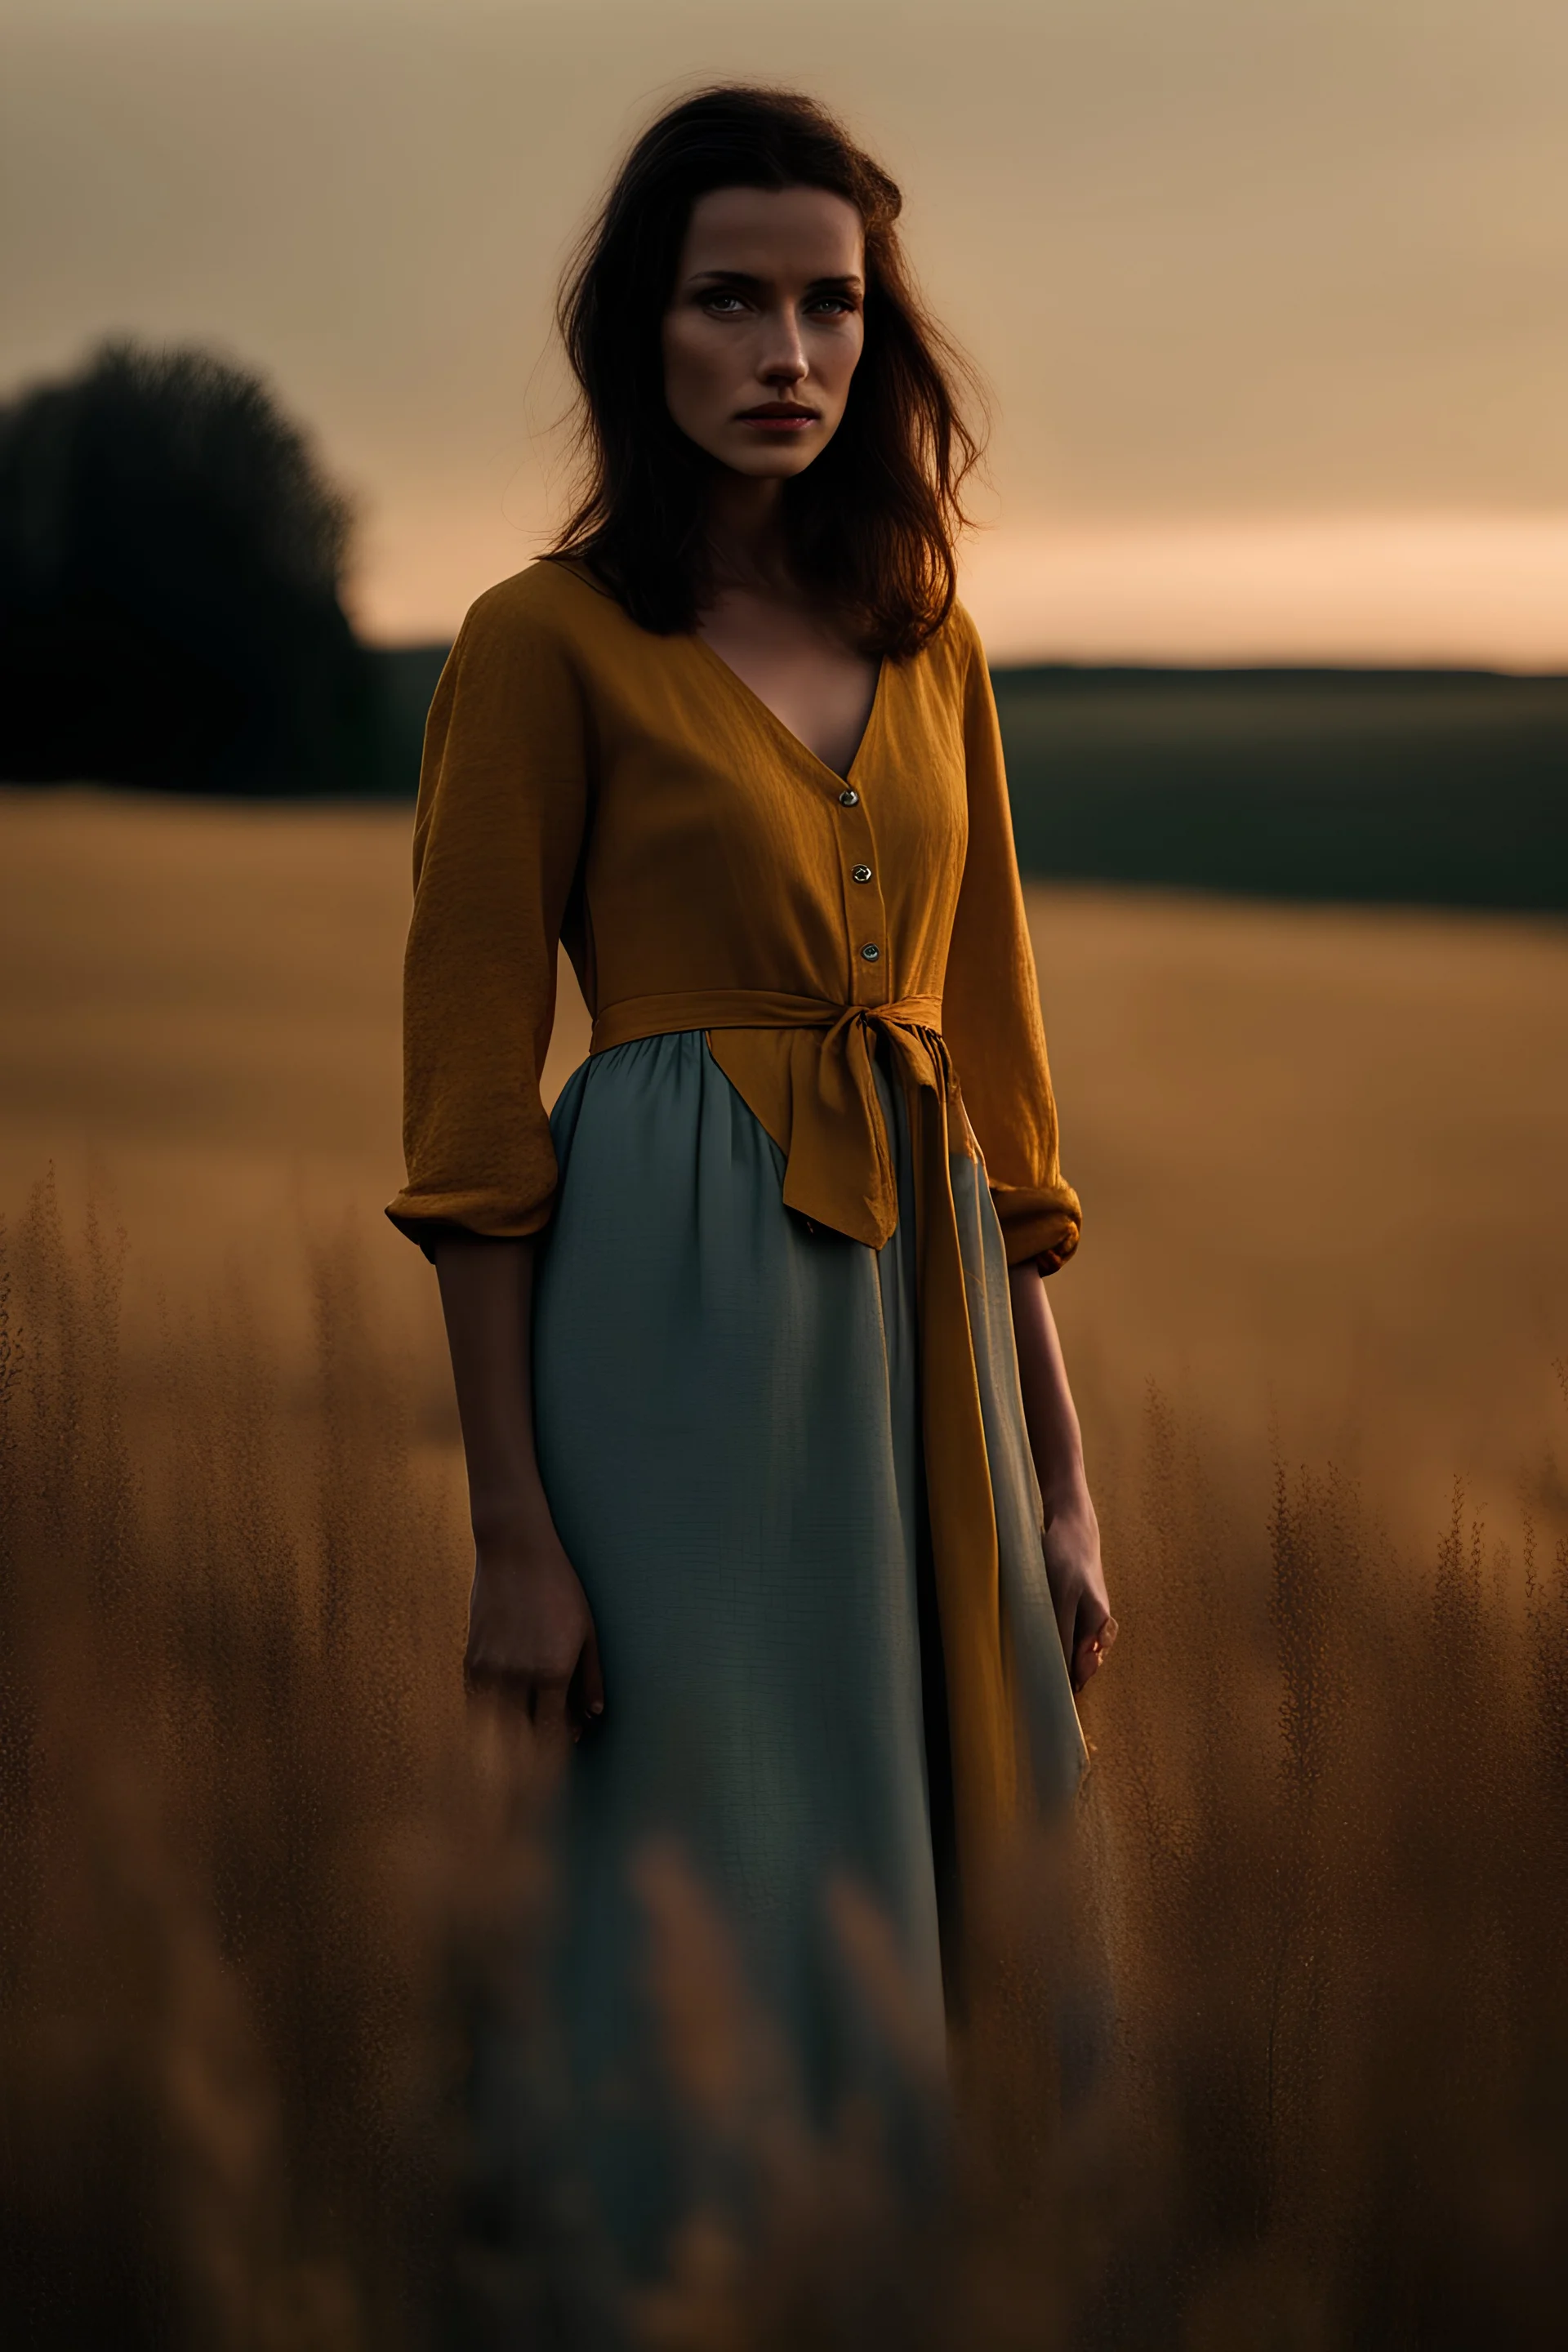 A mysterious brunette woman with sharp cheekbones is standing in a field in Thuringia at dawn. She is wearing a mustard linen dress and seen from afar. The sky is pale blue. The photo is taken with an iPhone.